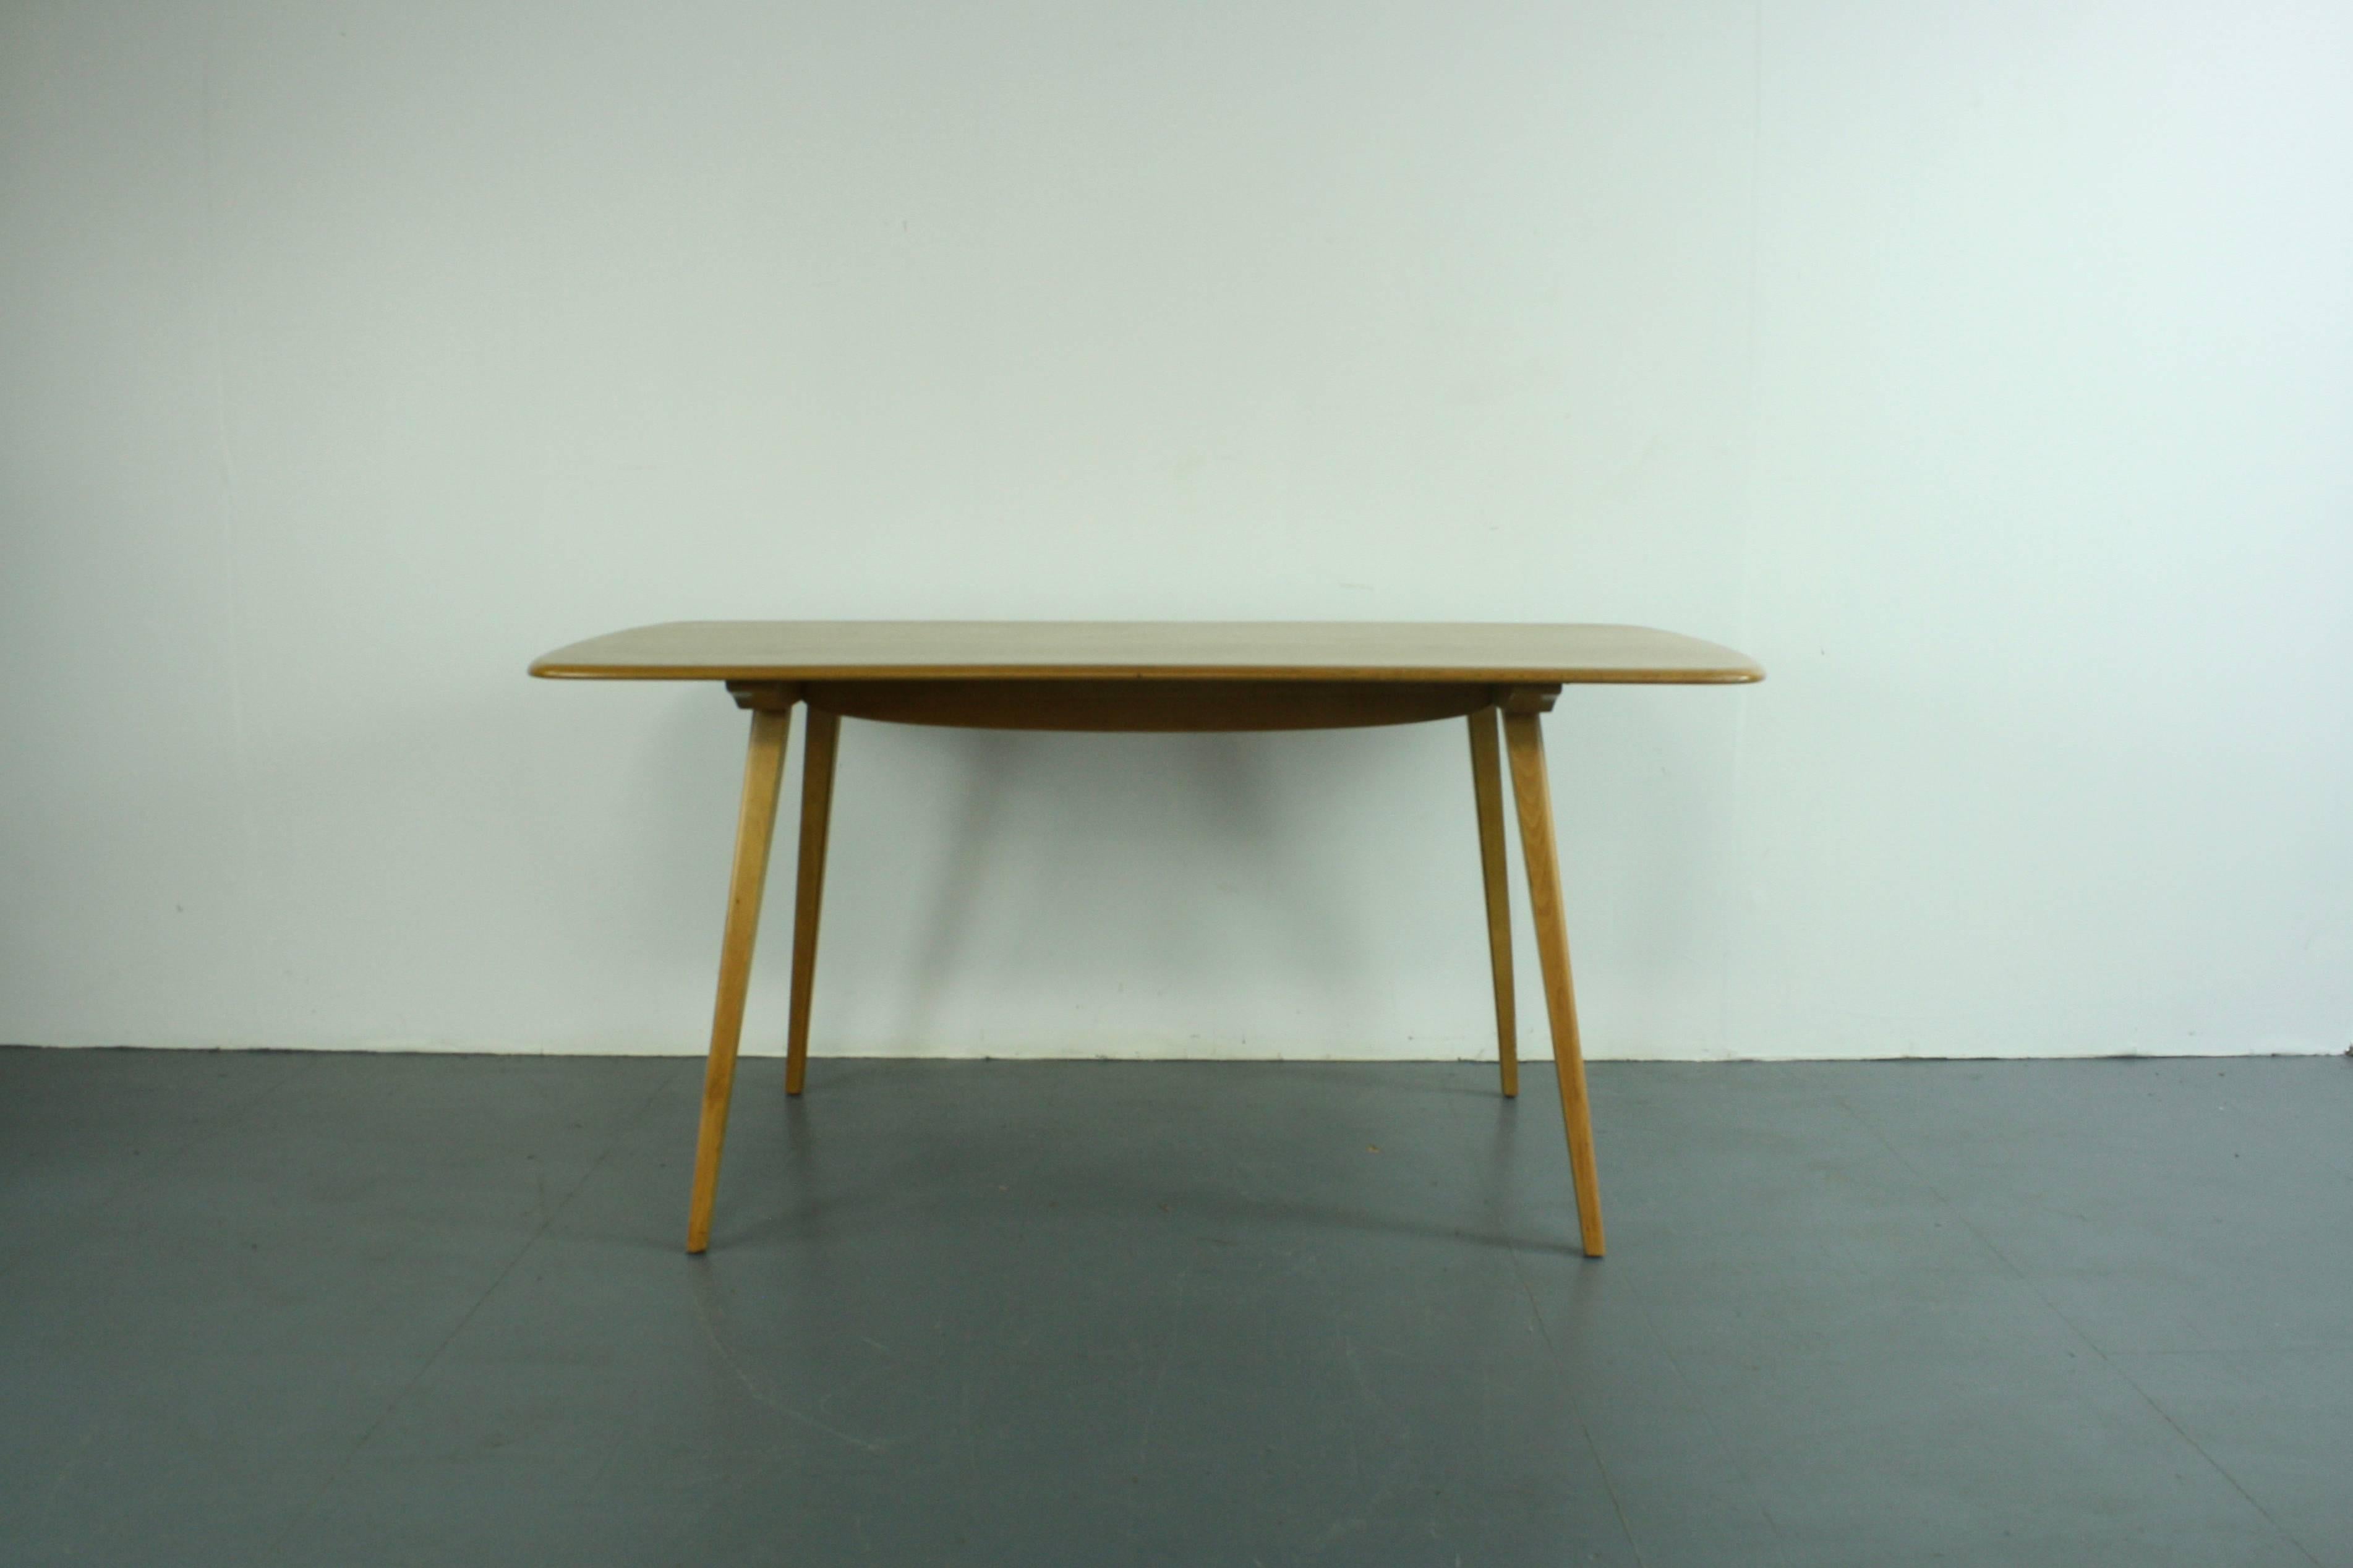 Elm Vintage Midcentury British Ercol Plank Dining Table For Sale